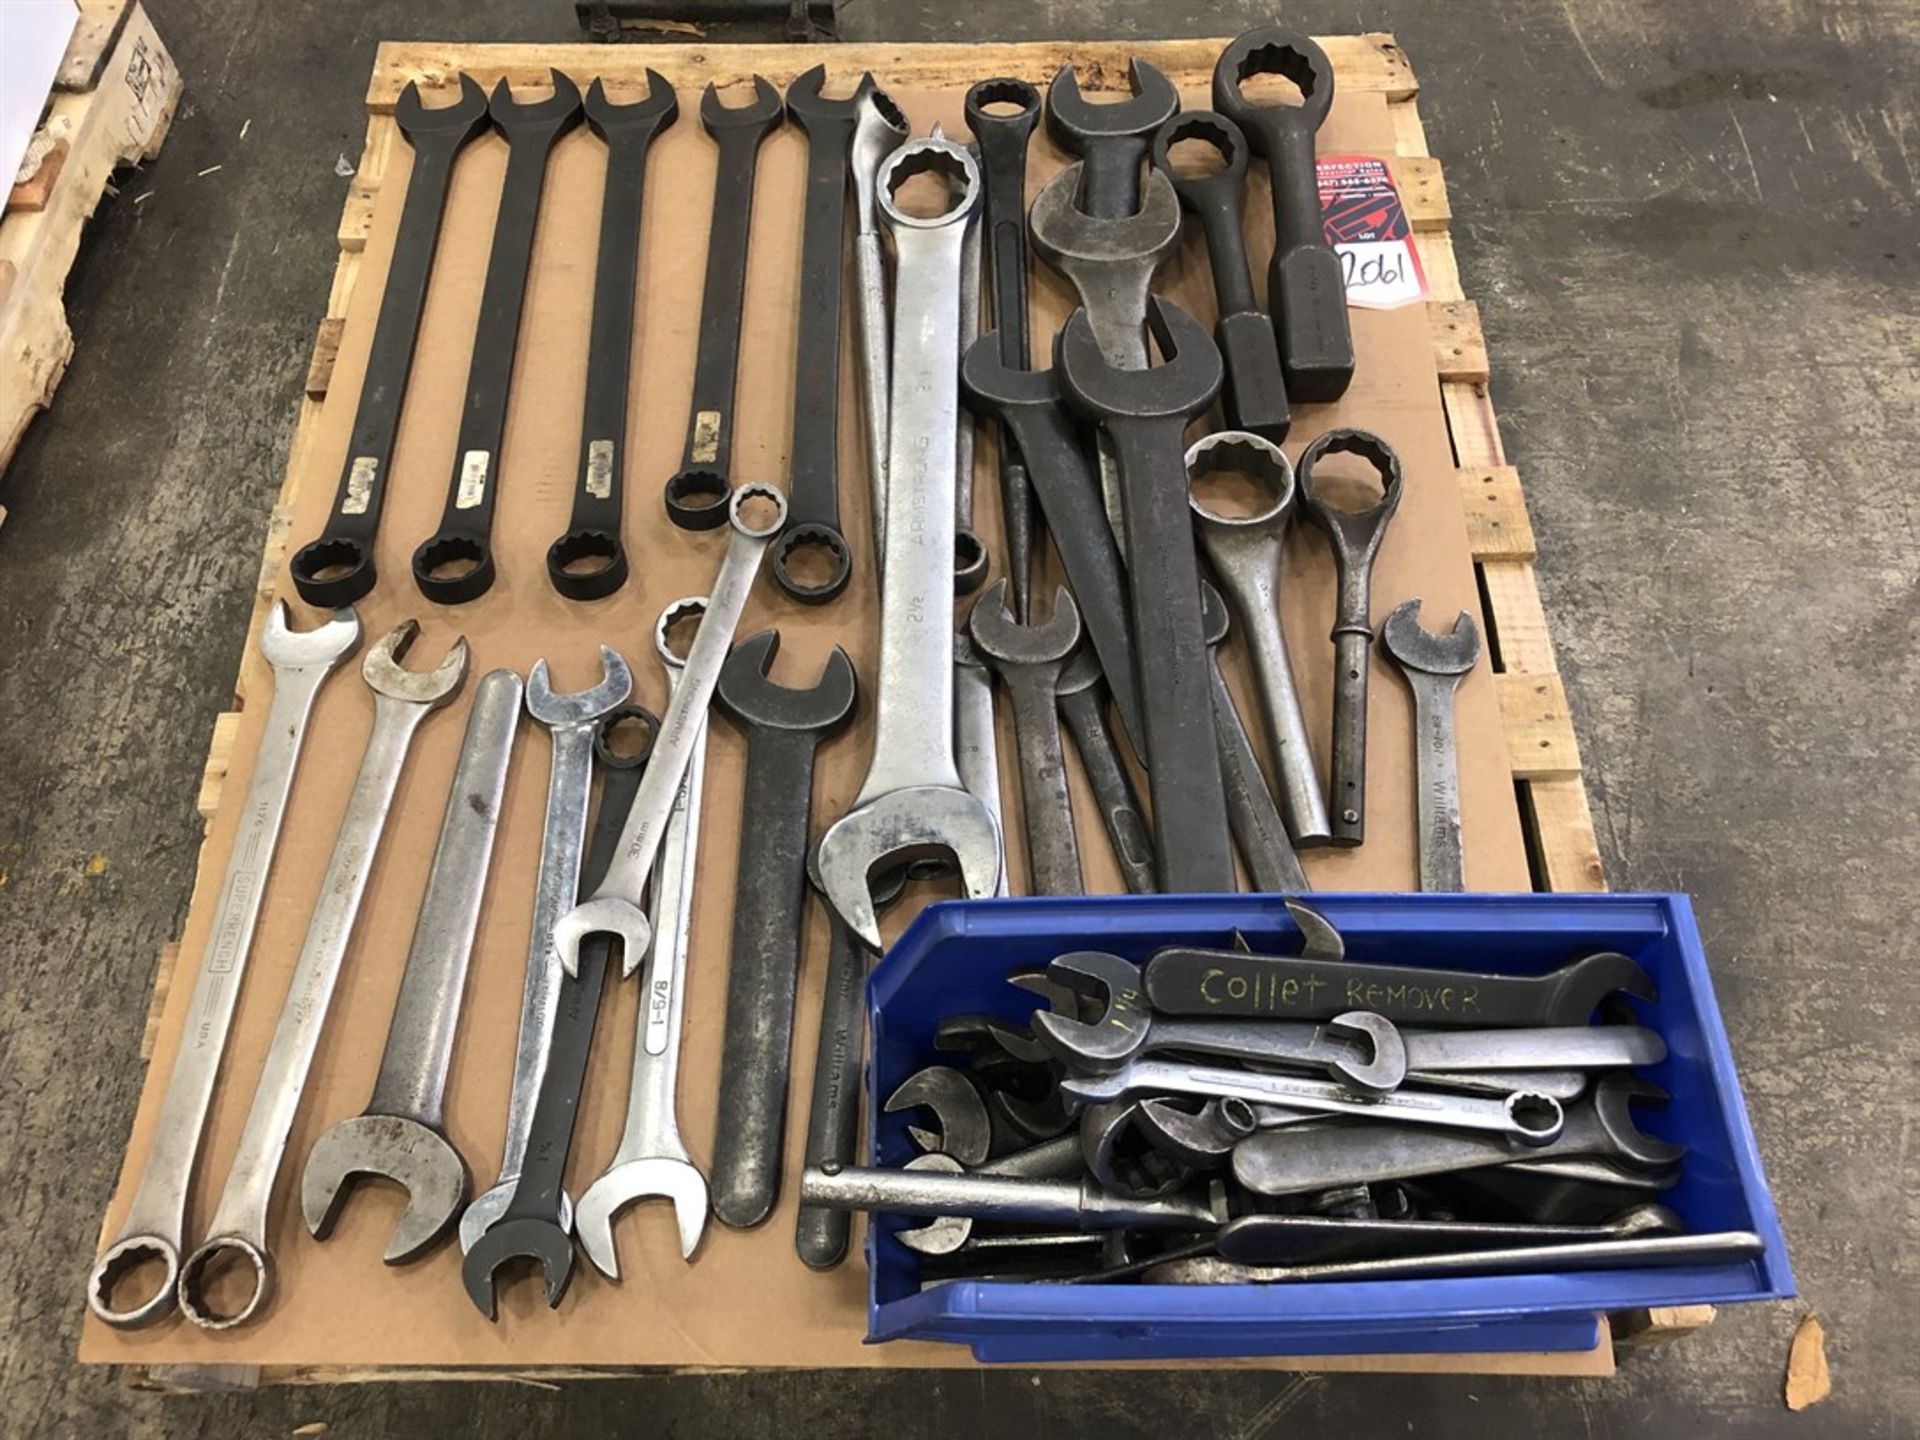 Lot Comprising Assorted Large Wrenches, and Strike Wrenches, (25F) - Image 2 of 2